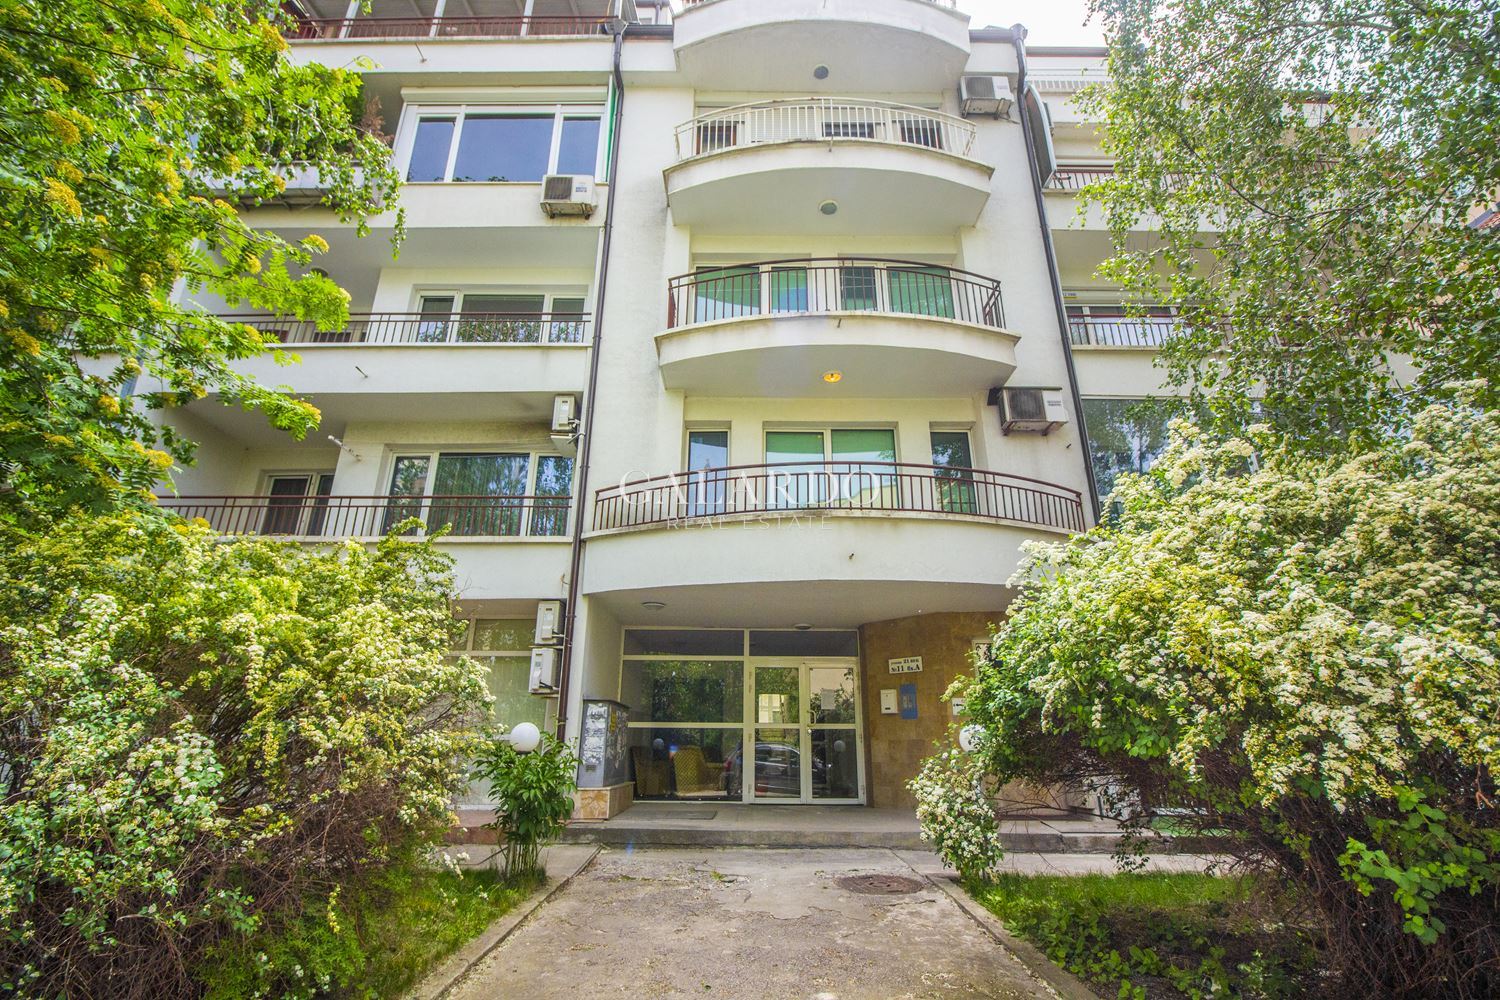 Two-bedroom apartment on two levels on 21st century Street, Studentski grad